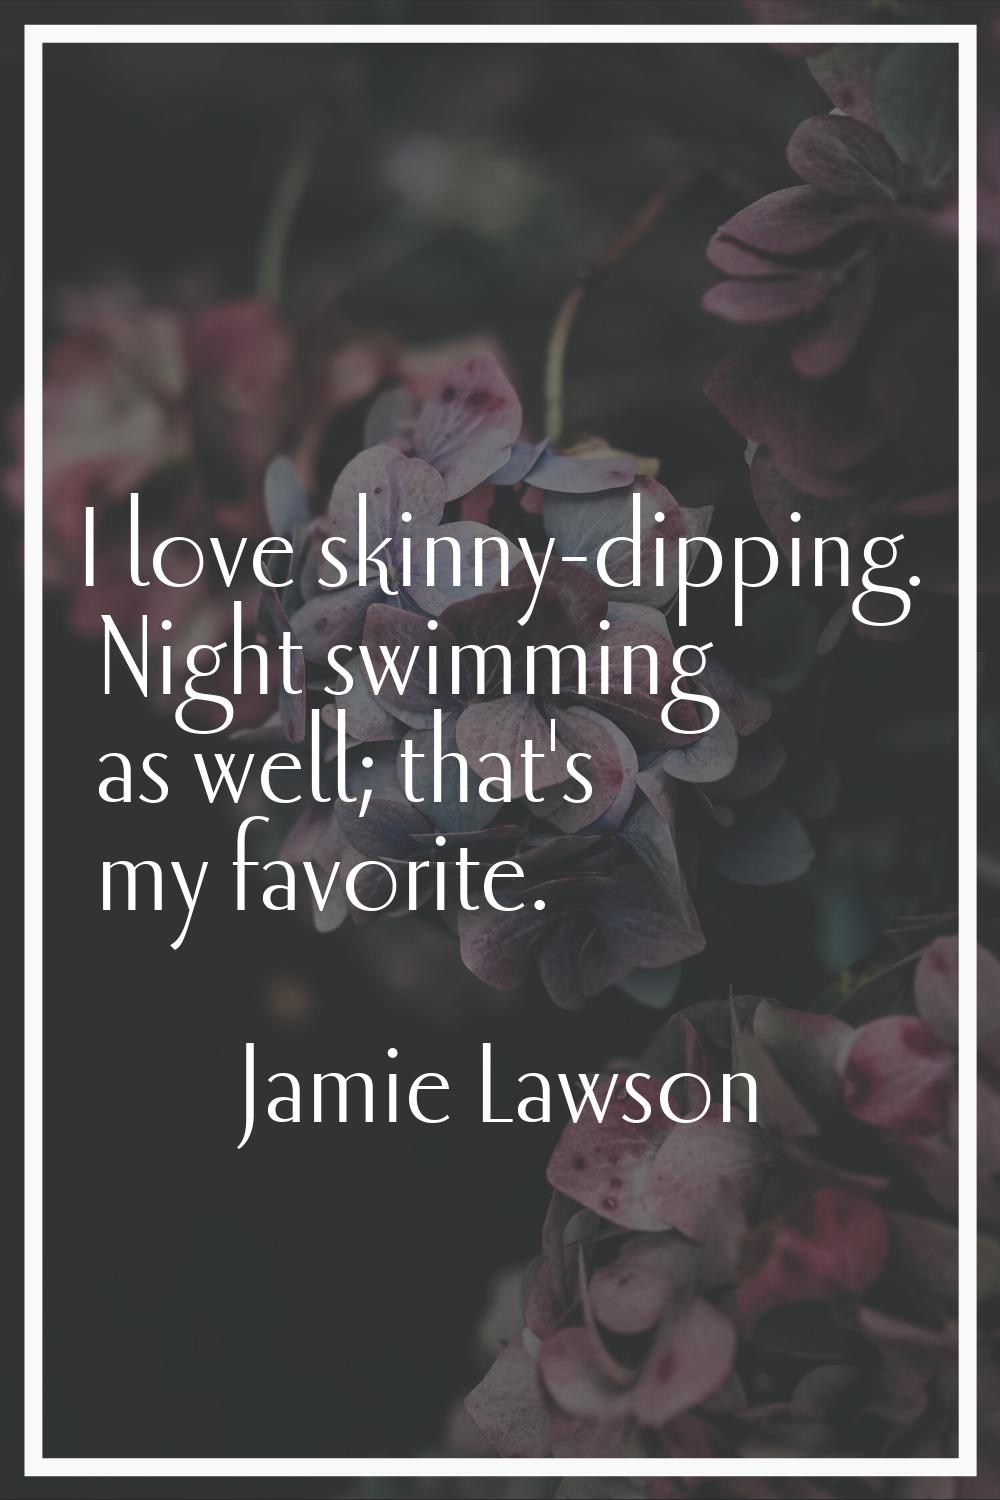 I love skinny-dipping. Night swimming as well; that's my favorite.